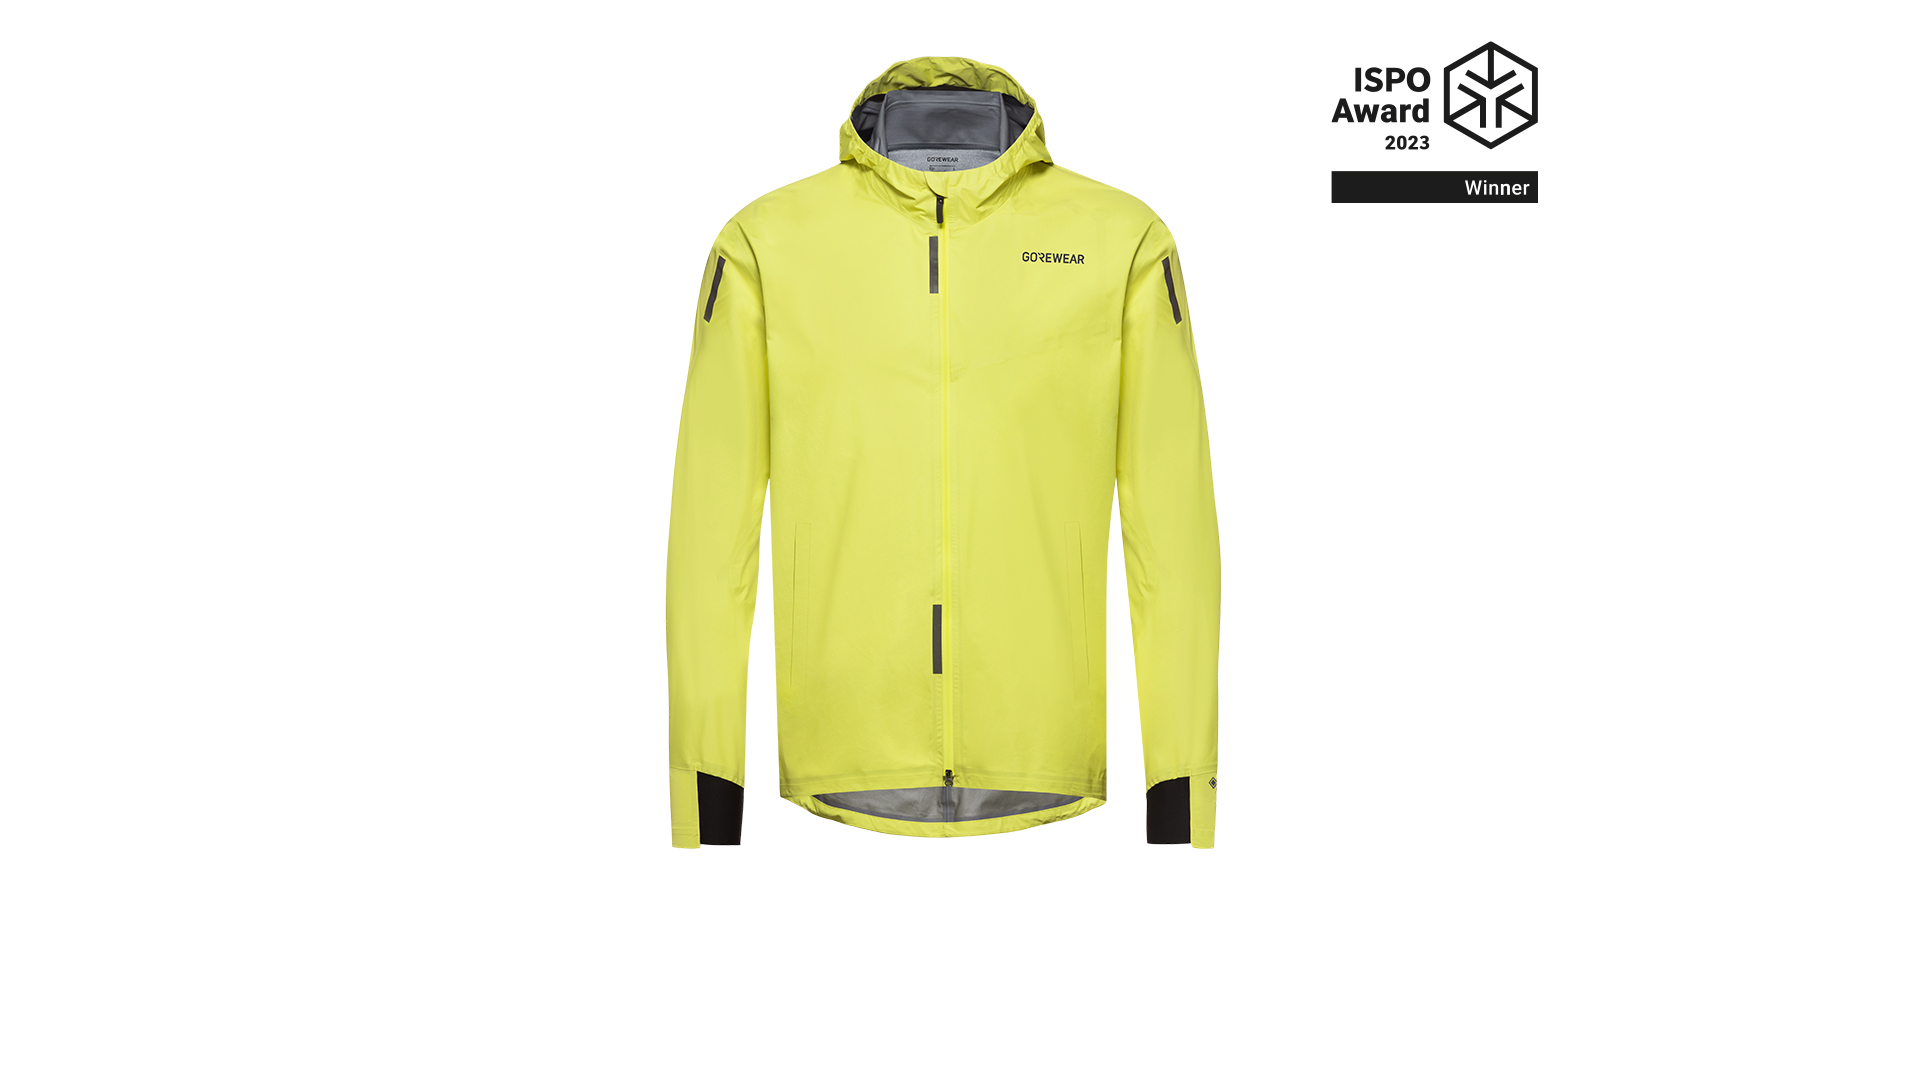 Review: The GOREWEAR Concurve GORE-TEX Jacket has won the ISPO